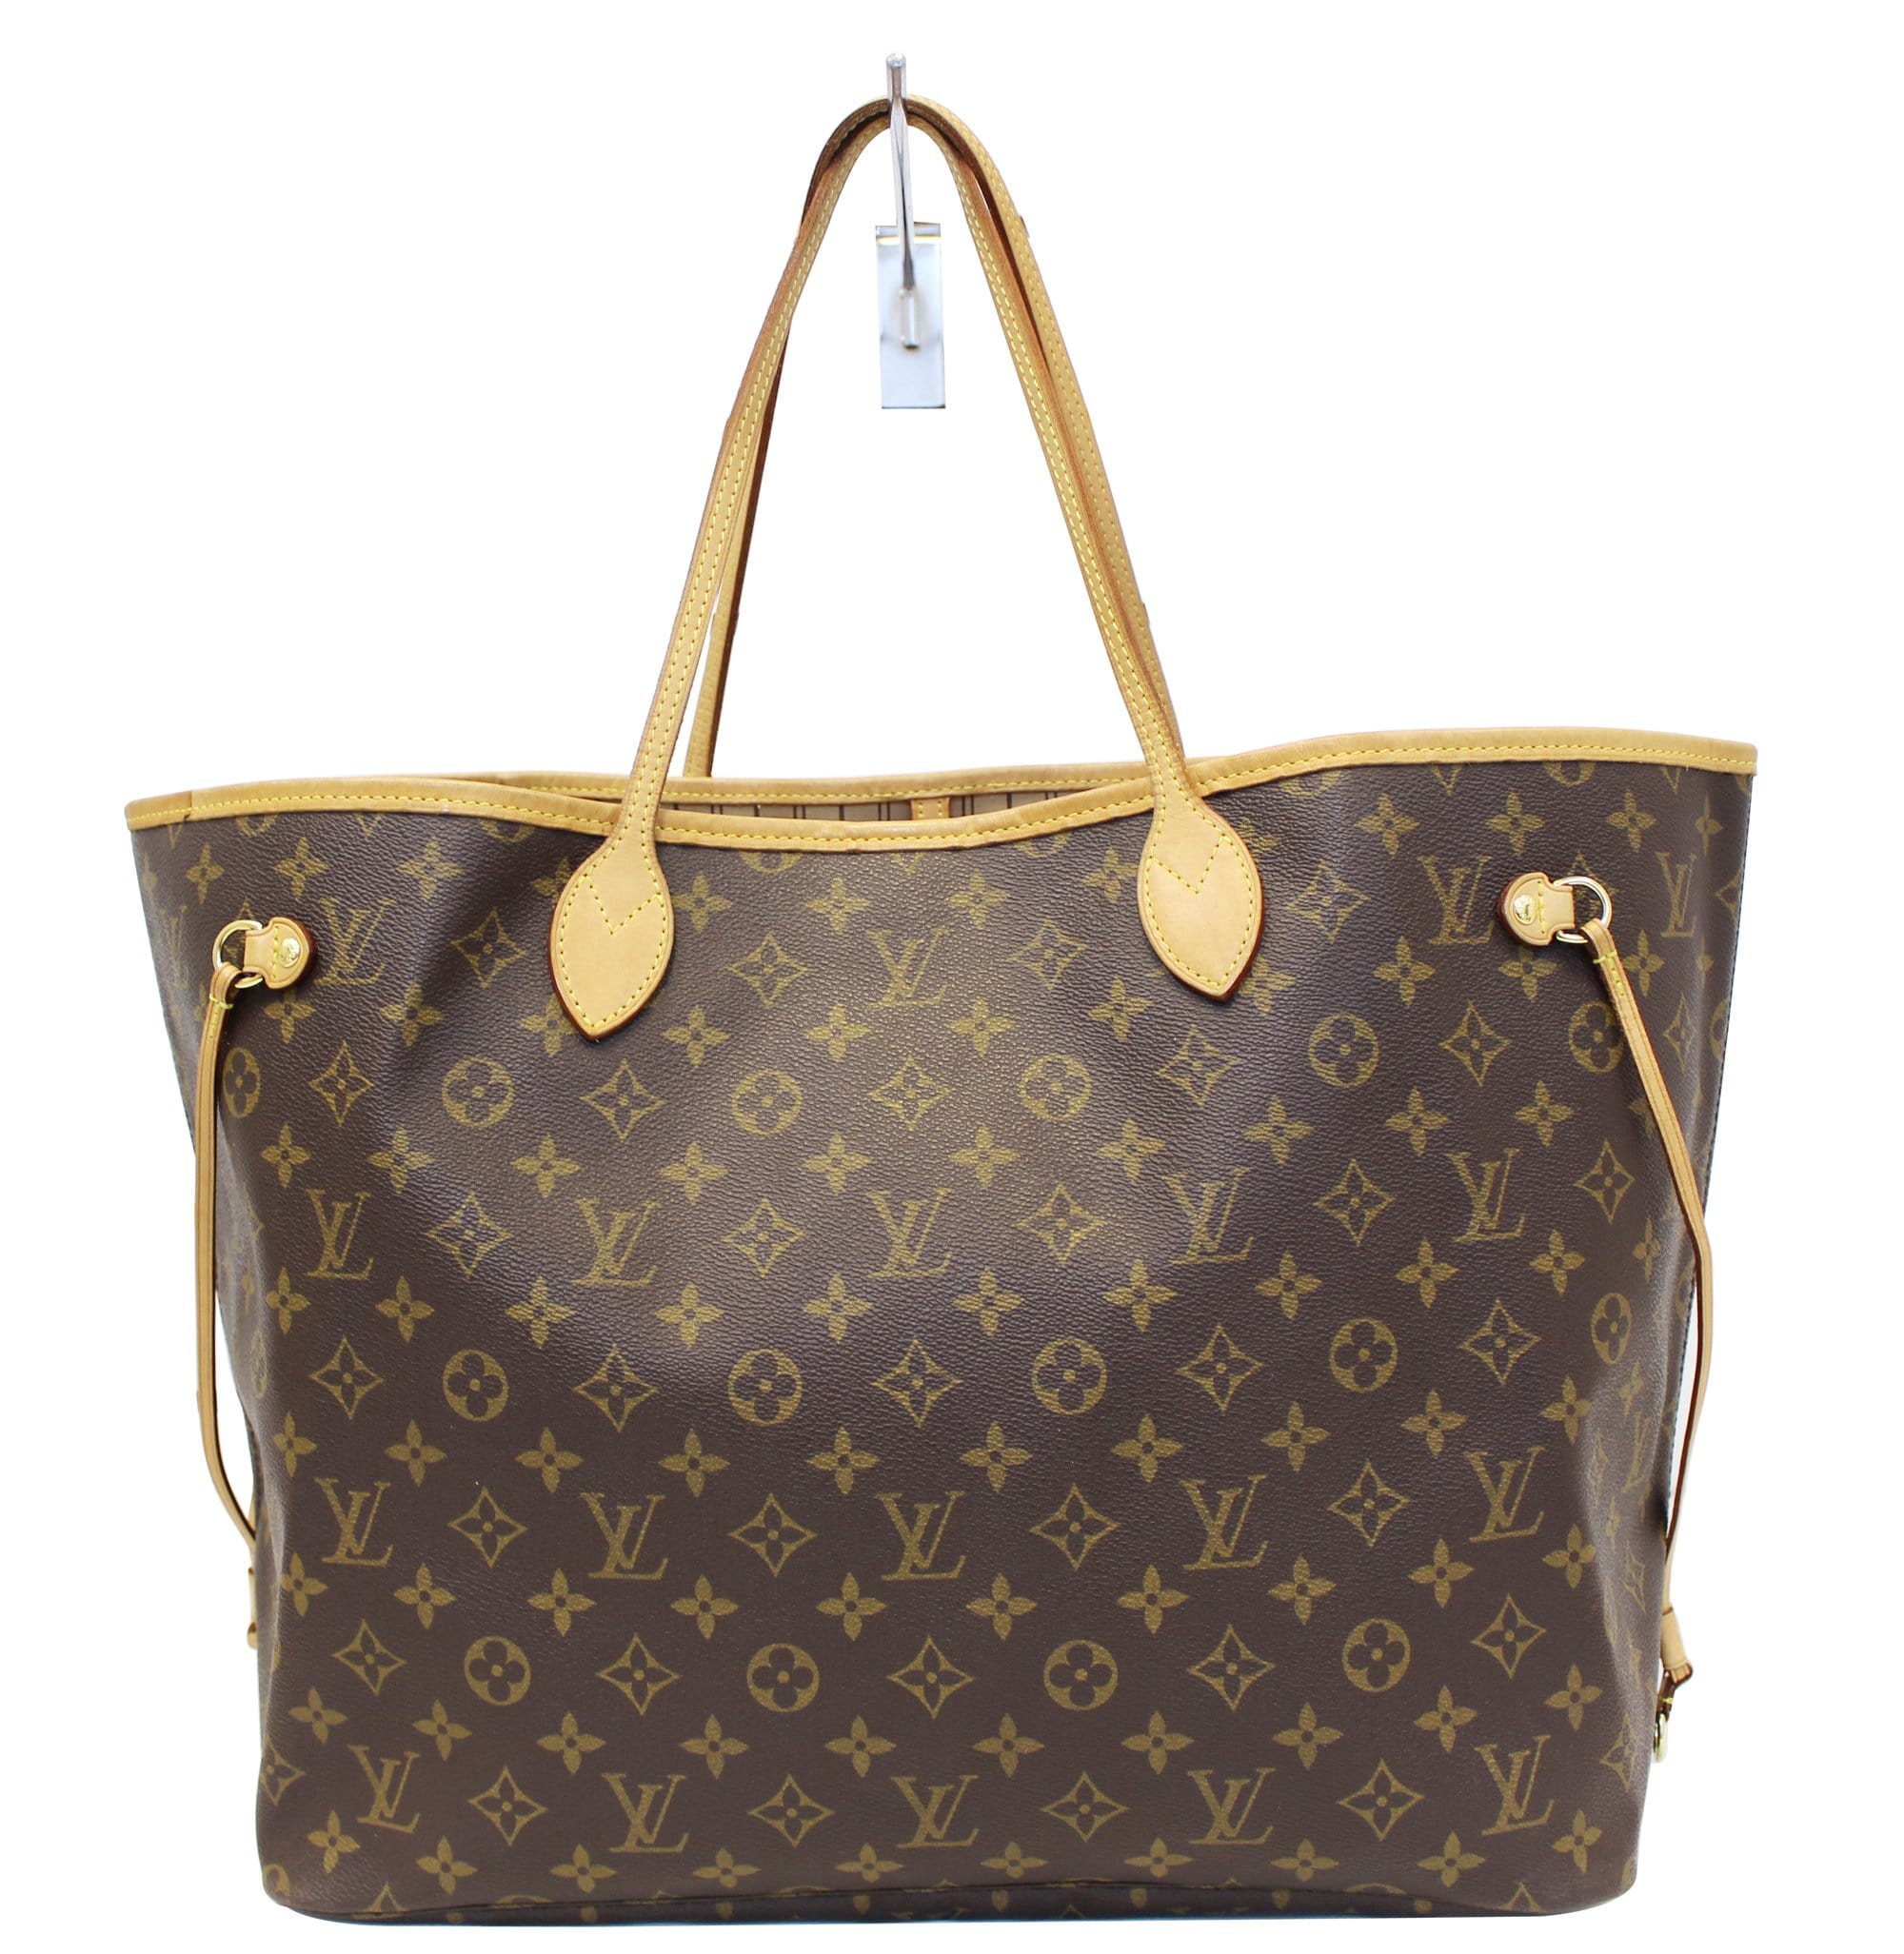 Vuitton Unicef - 4 For Sale on 1stDibs